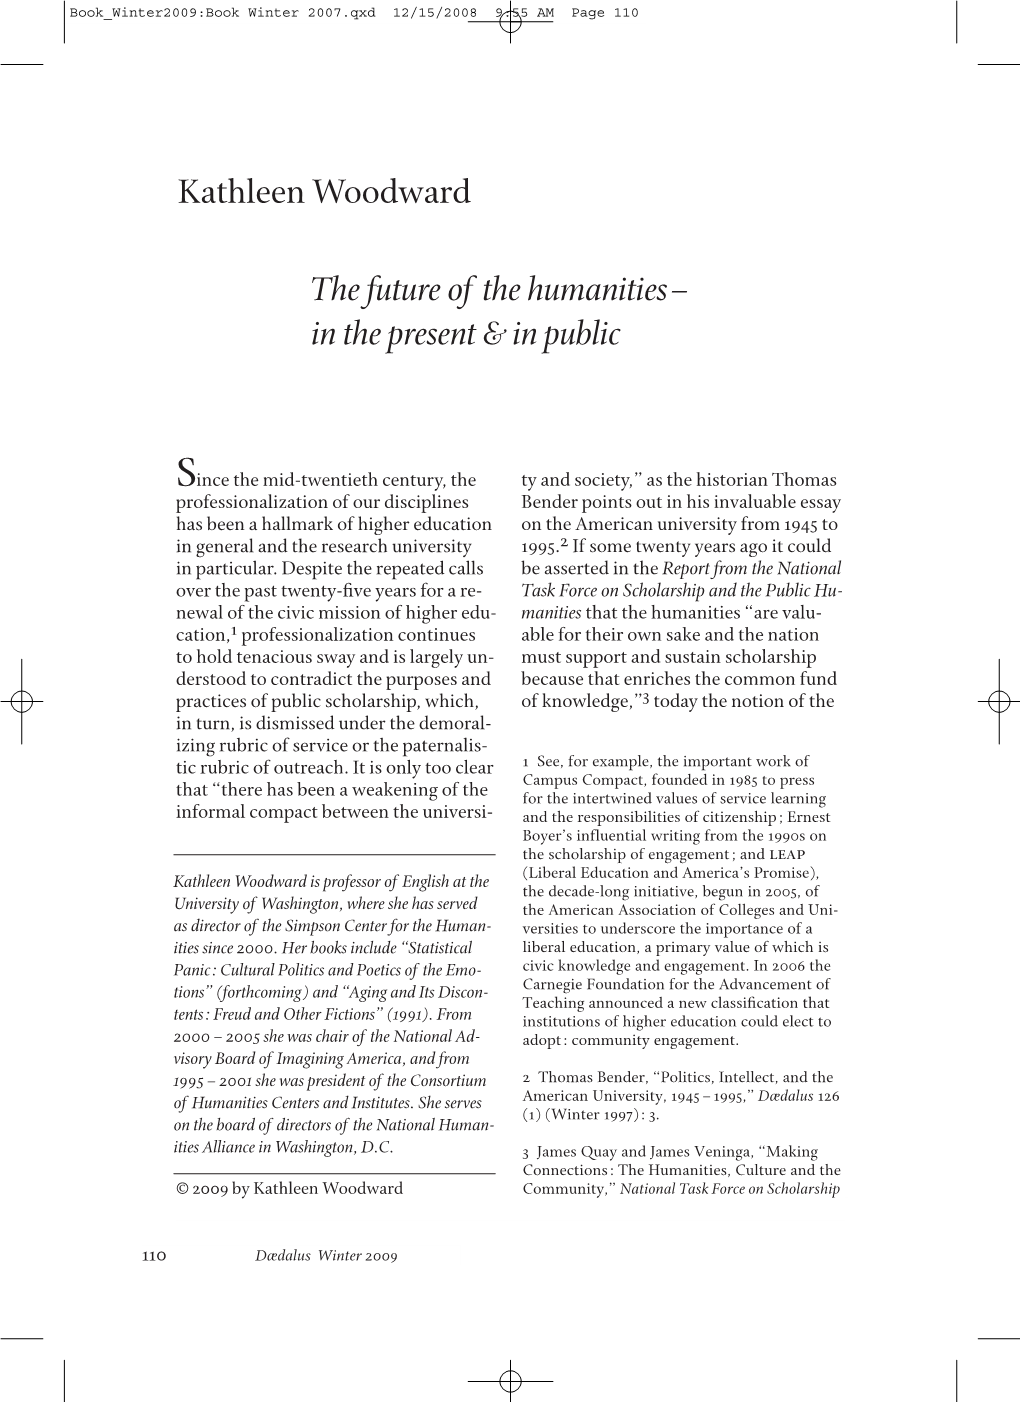 The Future of the Humanities-In the Present & in Public